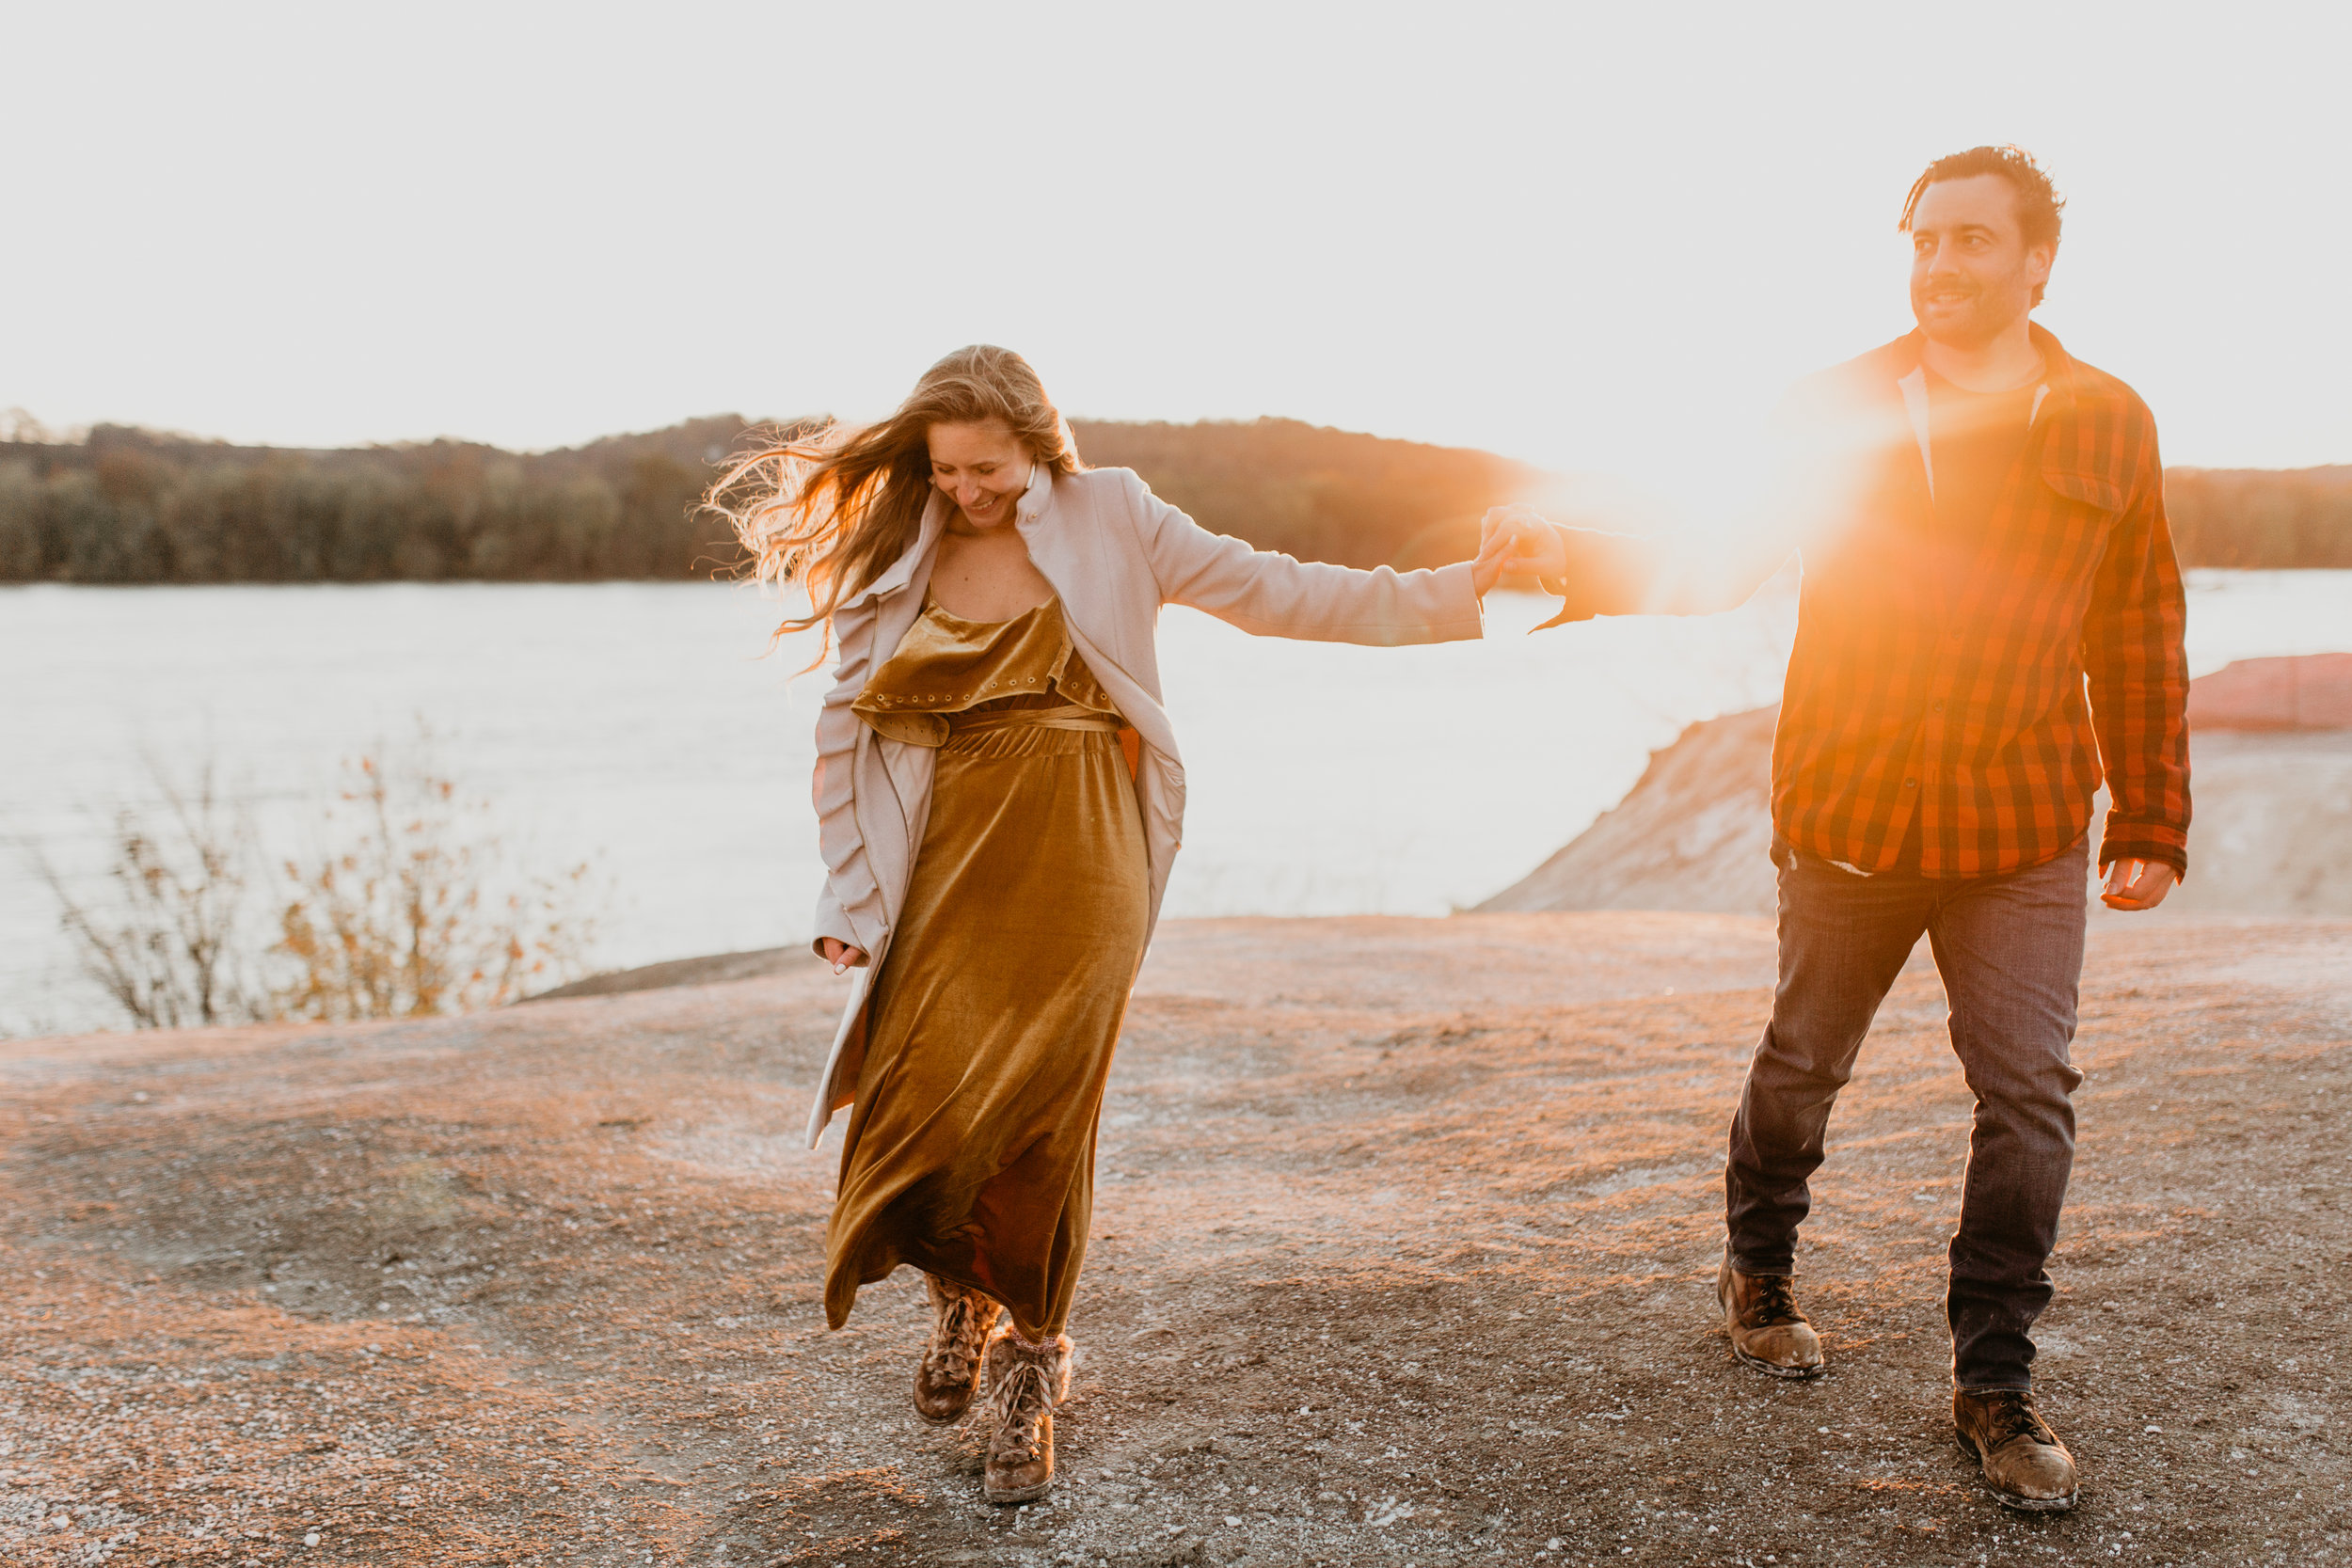 nicole-daacke-photography-white-cliffs-of-conoy-in-lancaster-pa-pennsylvania-adventure-session-adventure-elopement-photographer-engagement session-in-lancaster-pa-photographer-golden-sunset-winter-solstice-wedding-riverside-elopement-4202.jpg